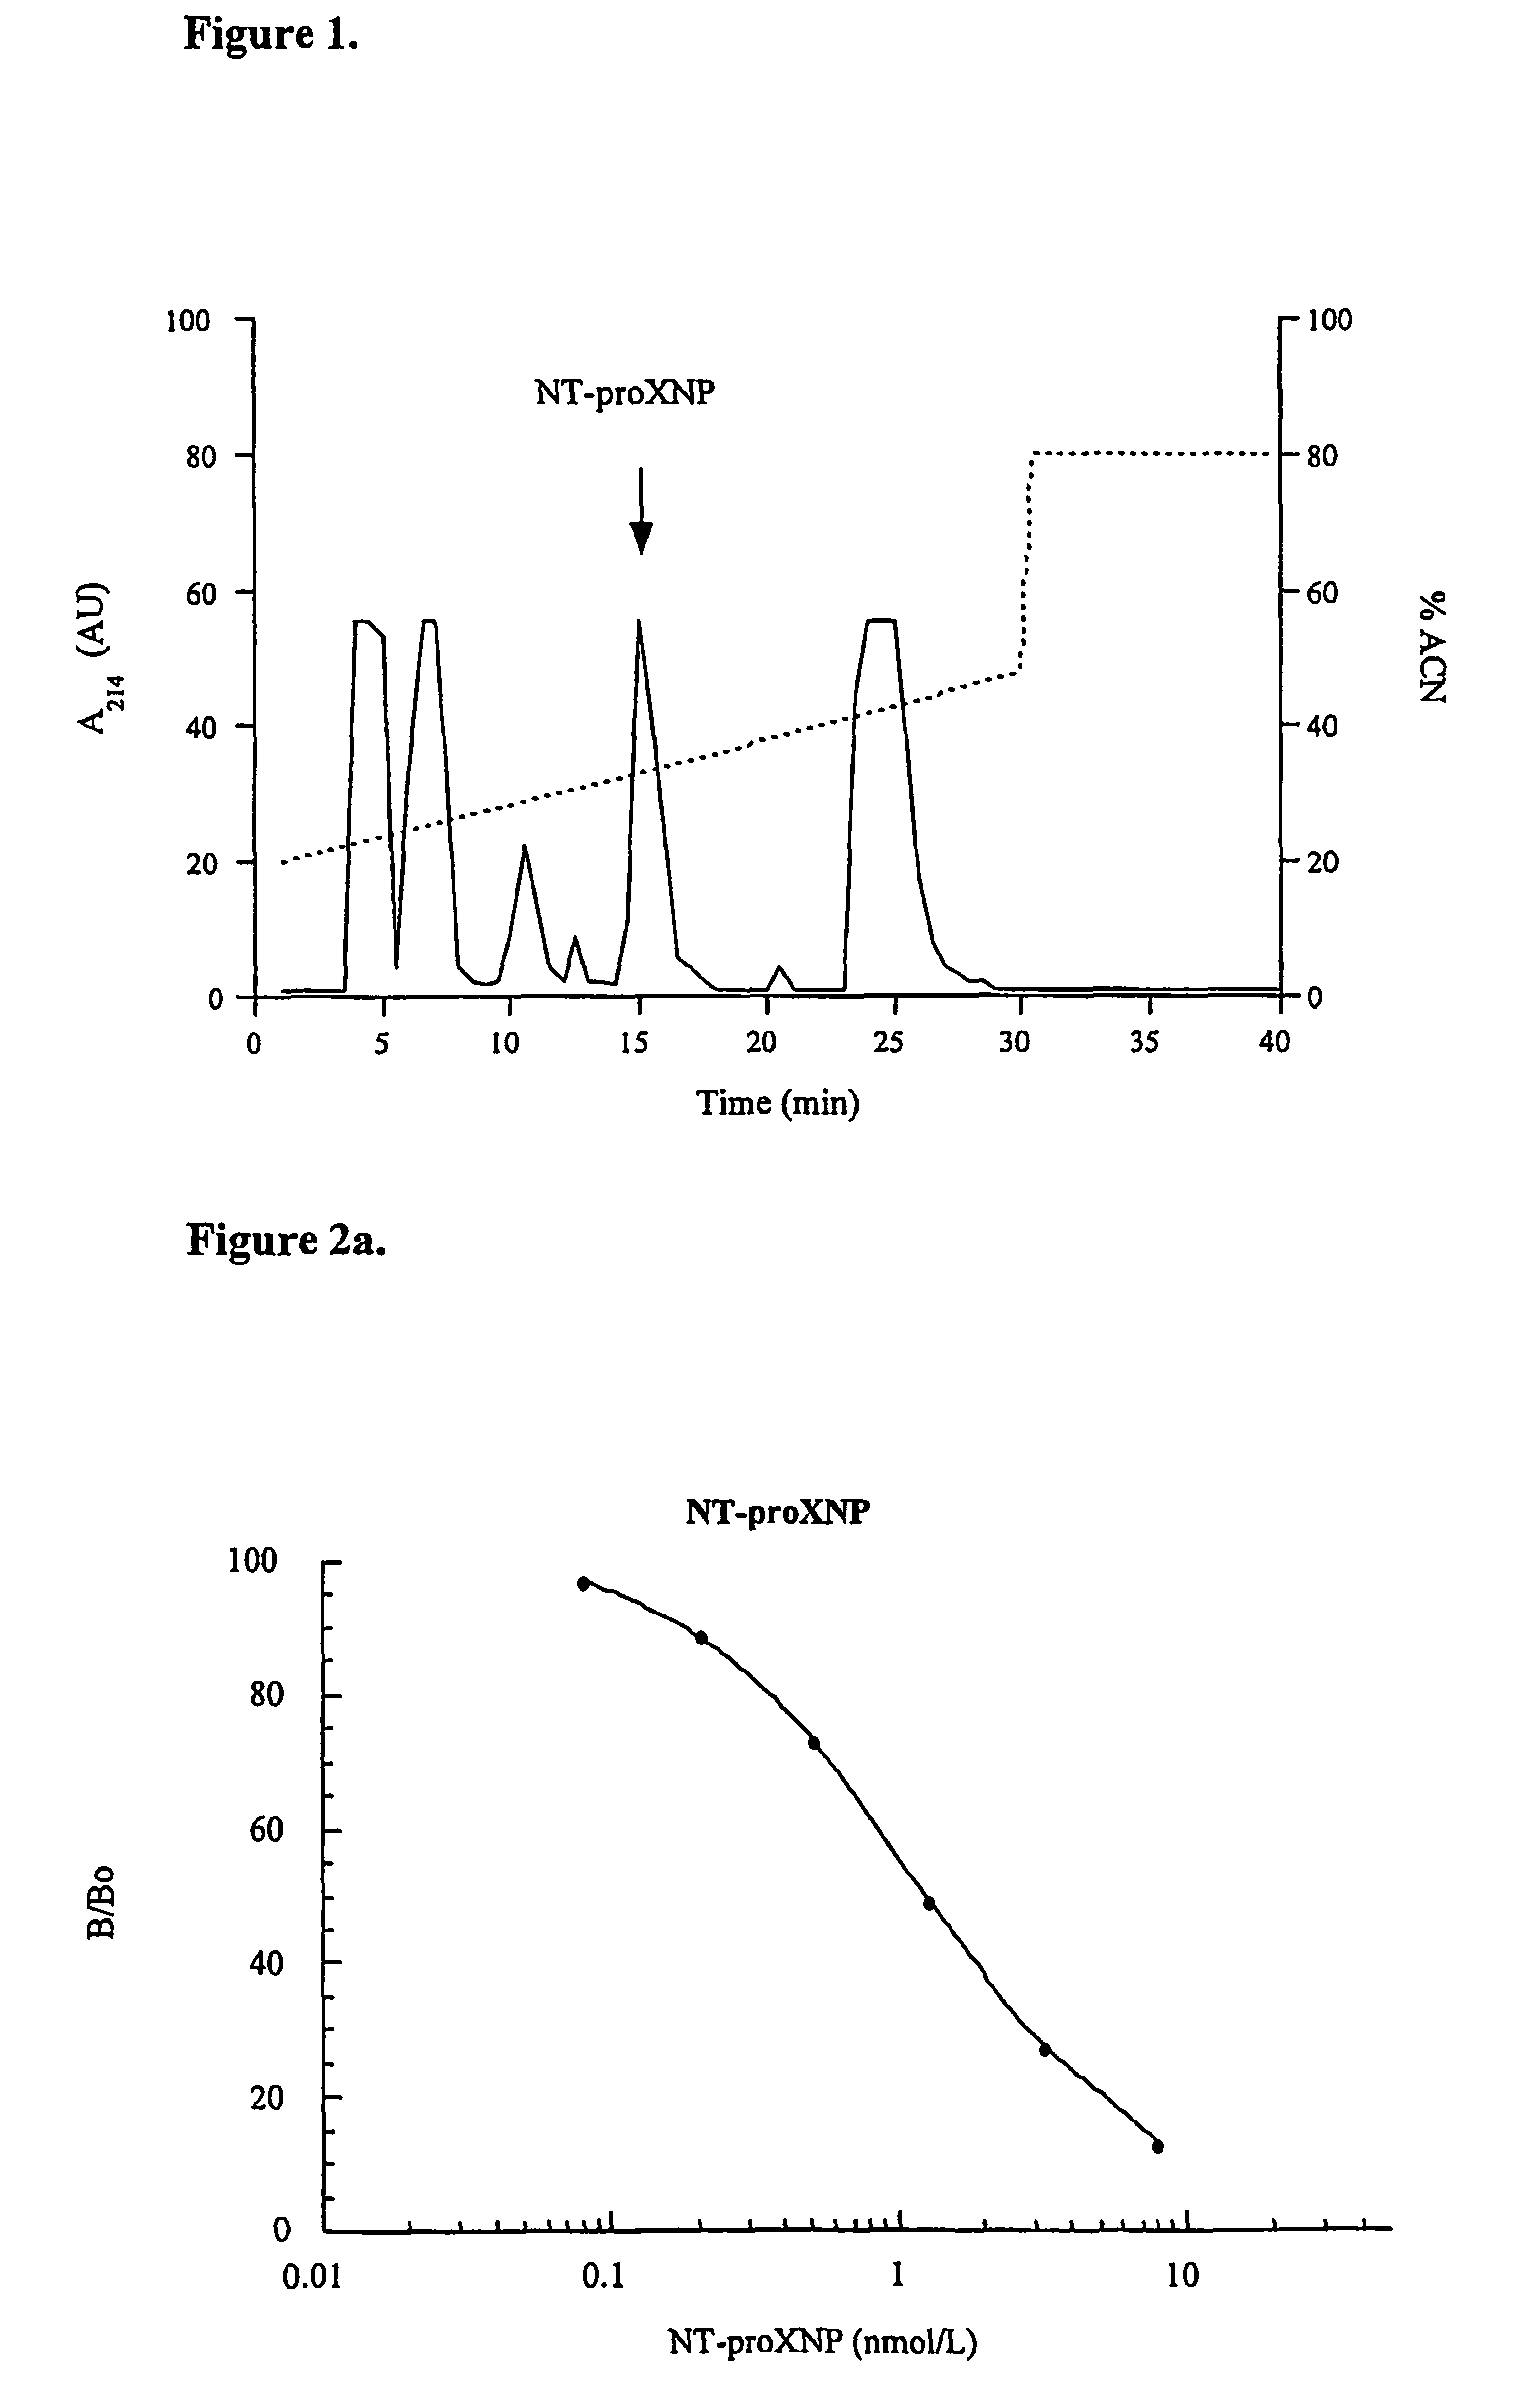 Methods of determination of activation or inactivation of atrial natriuretic peptide (ANP) and brain natriuretic peptide (BNP) hormonal systems